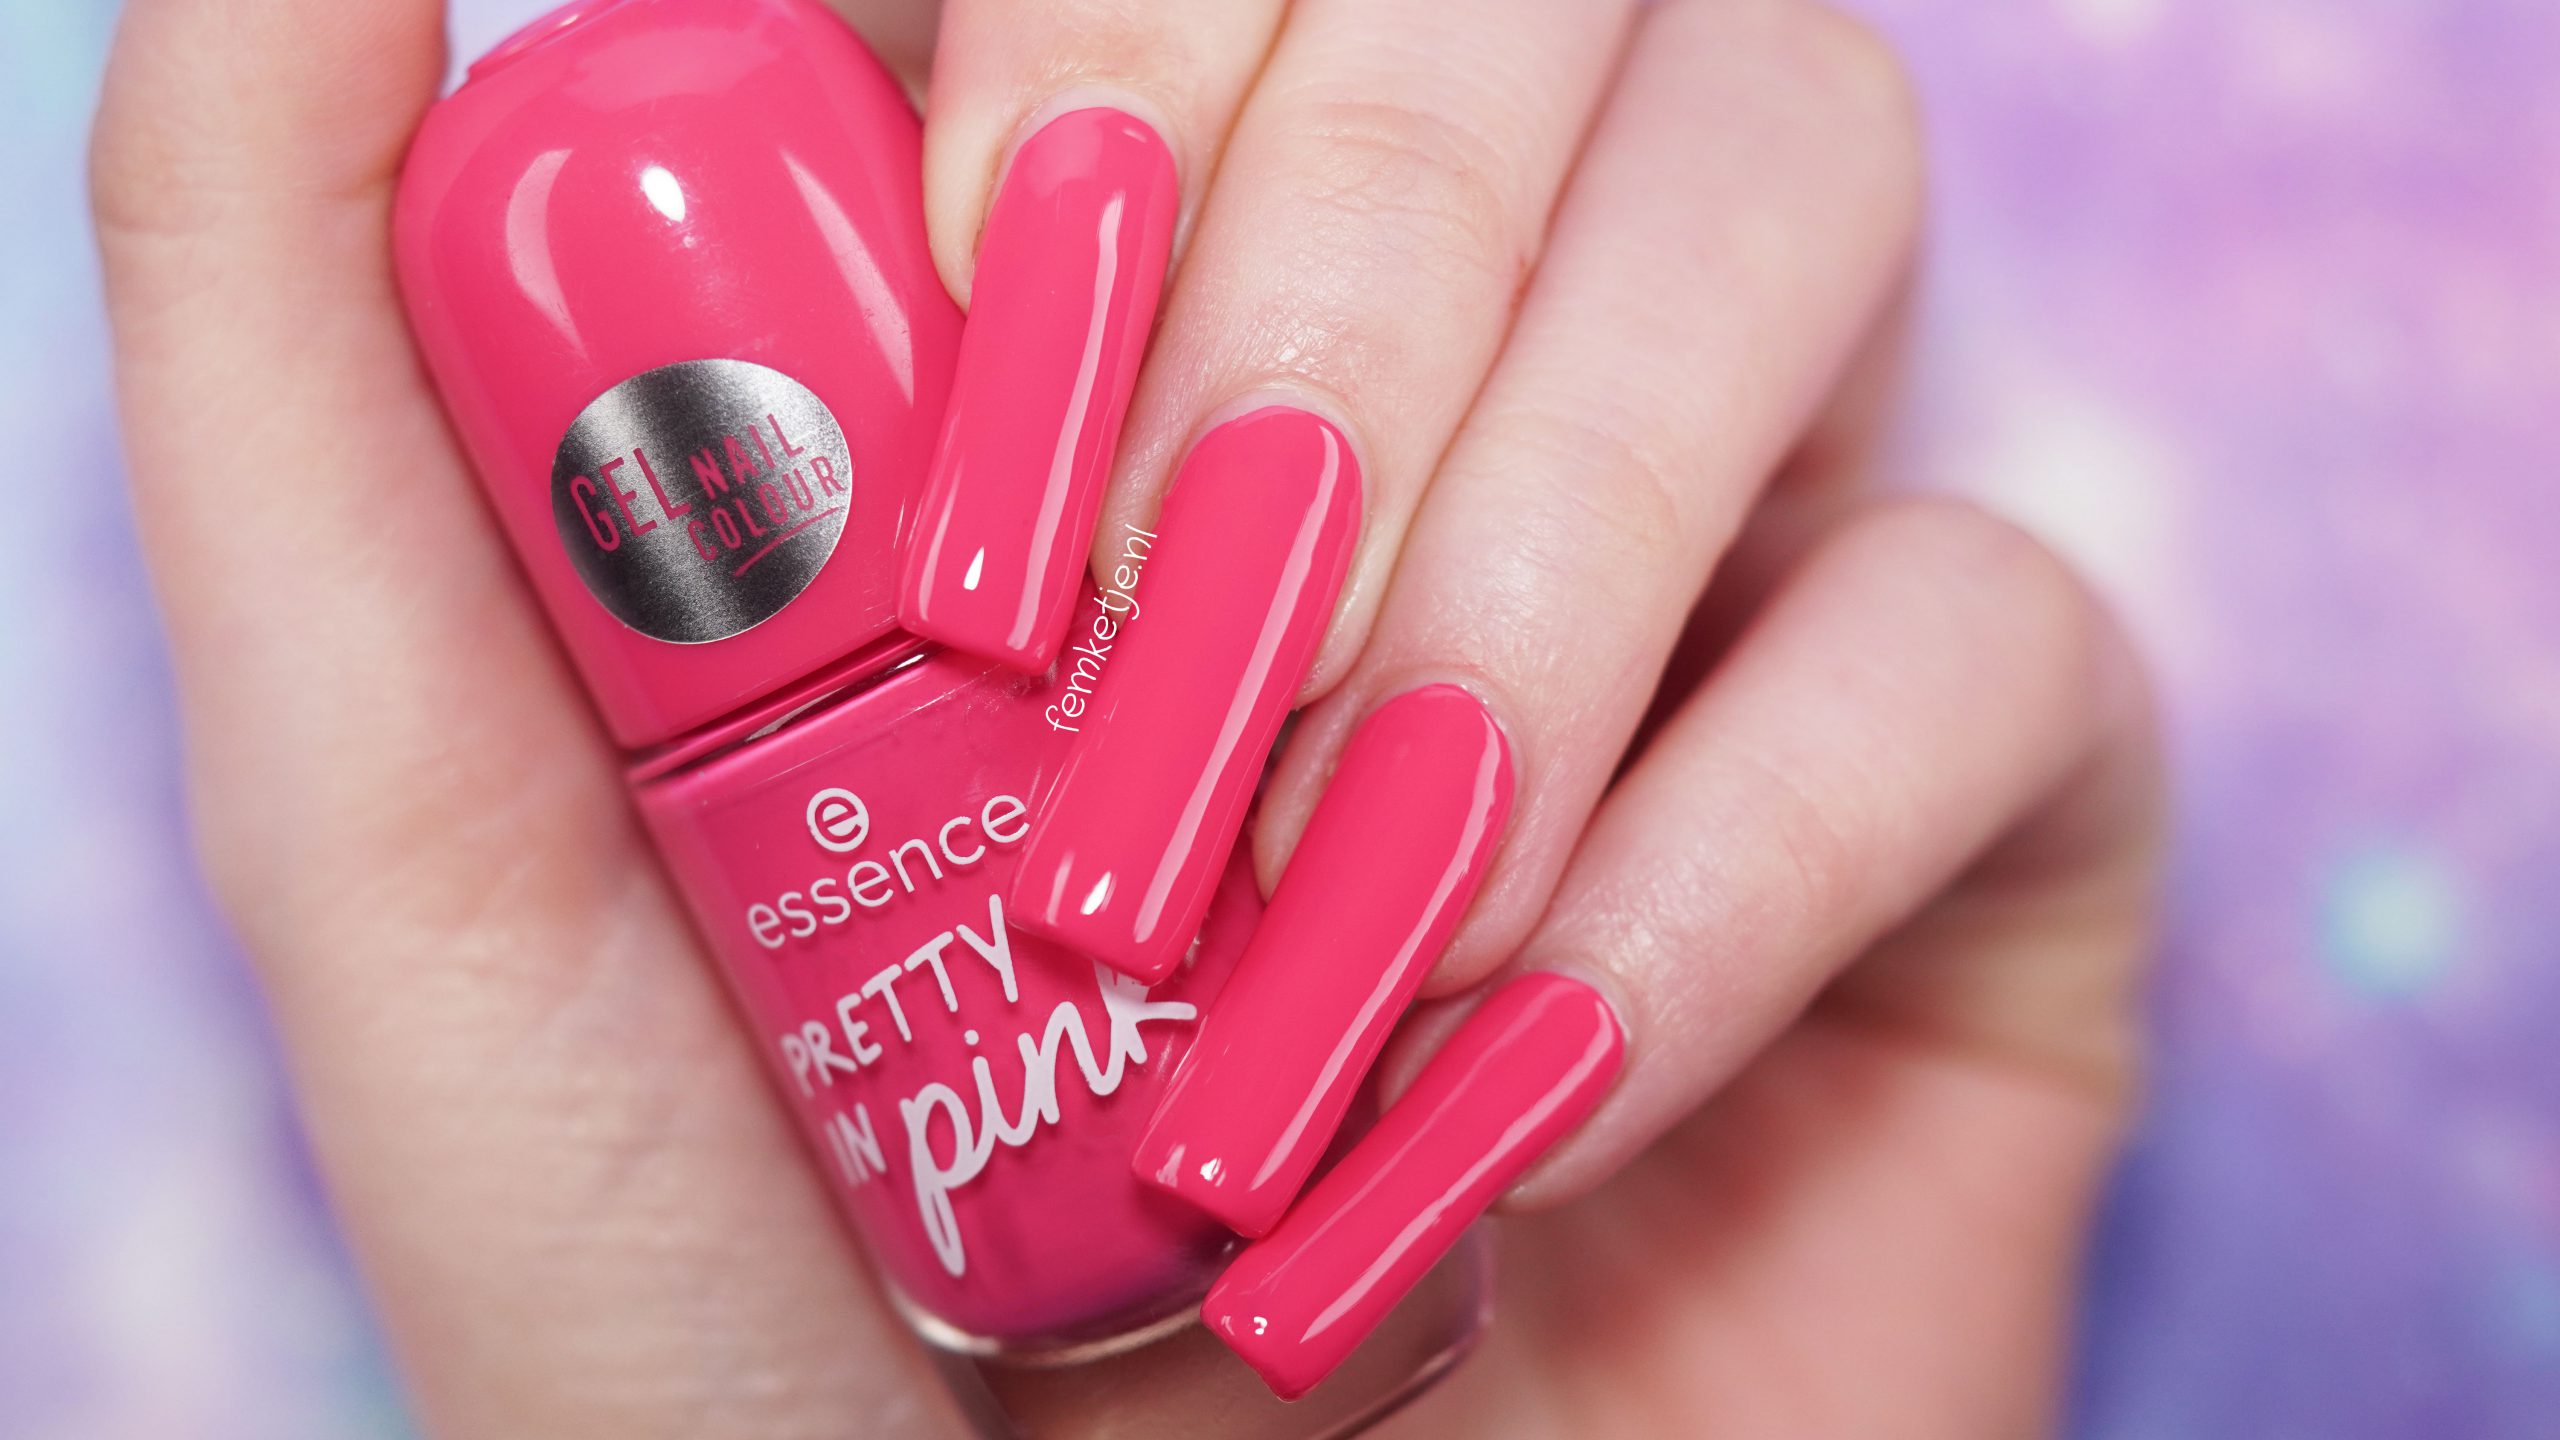 Pin on pretty in pink.